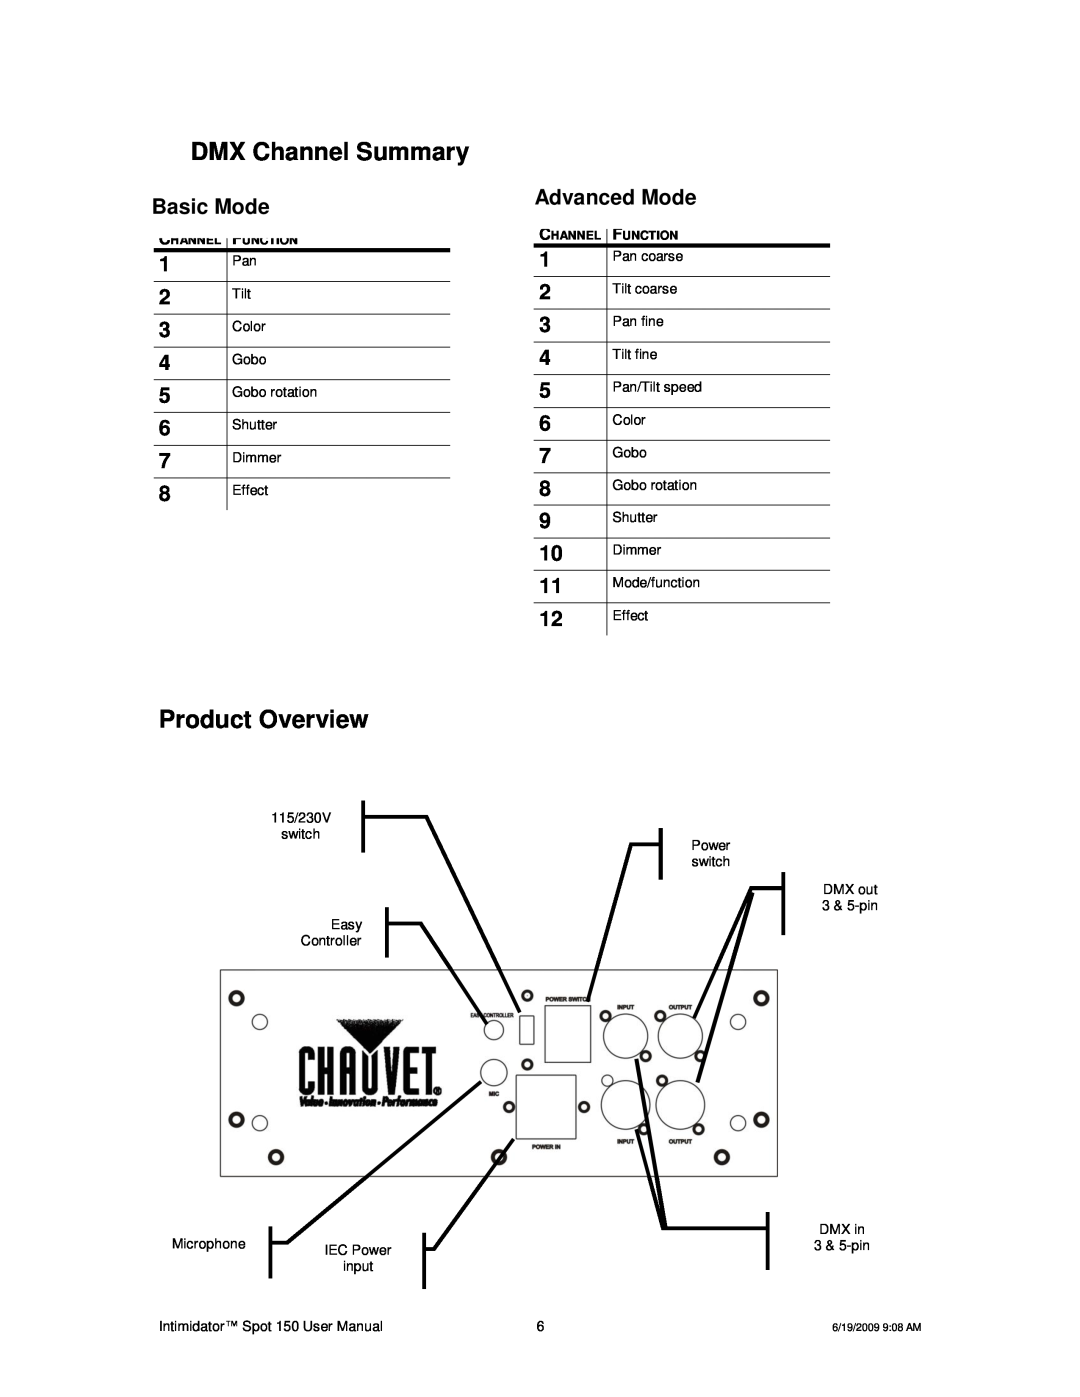 Chauvet 150 user manual DMX Channel Summary, Product Overview, Basic Mode, Advanced Mode 